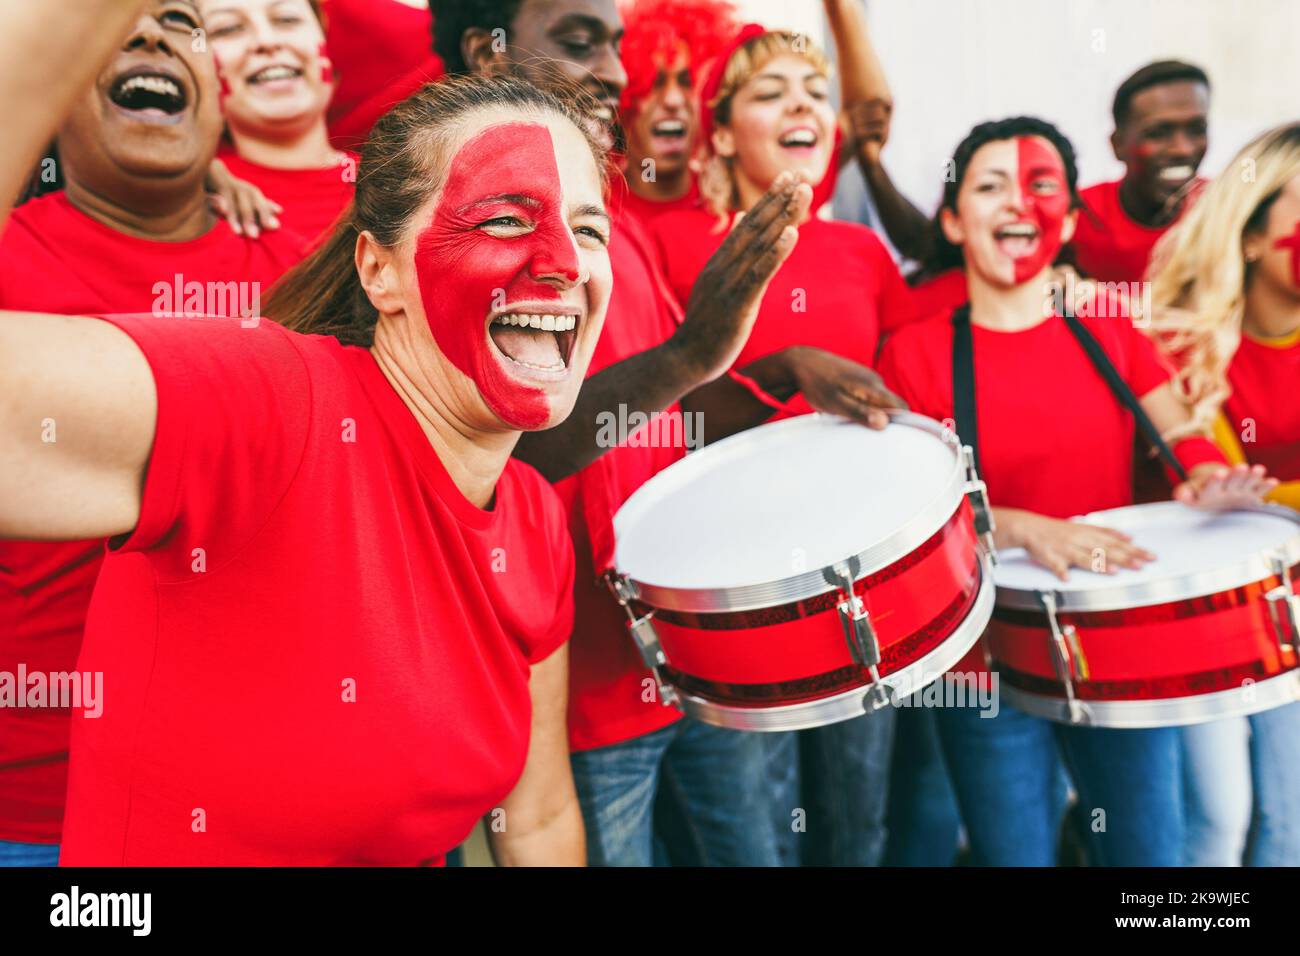 Multiracial red sport fans screaming while supporting their team - Football supporters having fun at competition event - Soft focus on senior woman fa Stock Photo